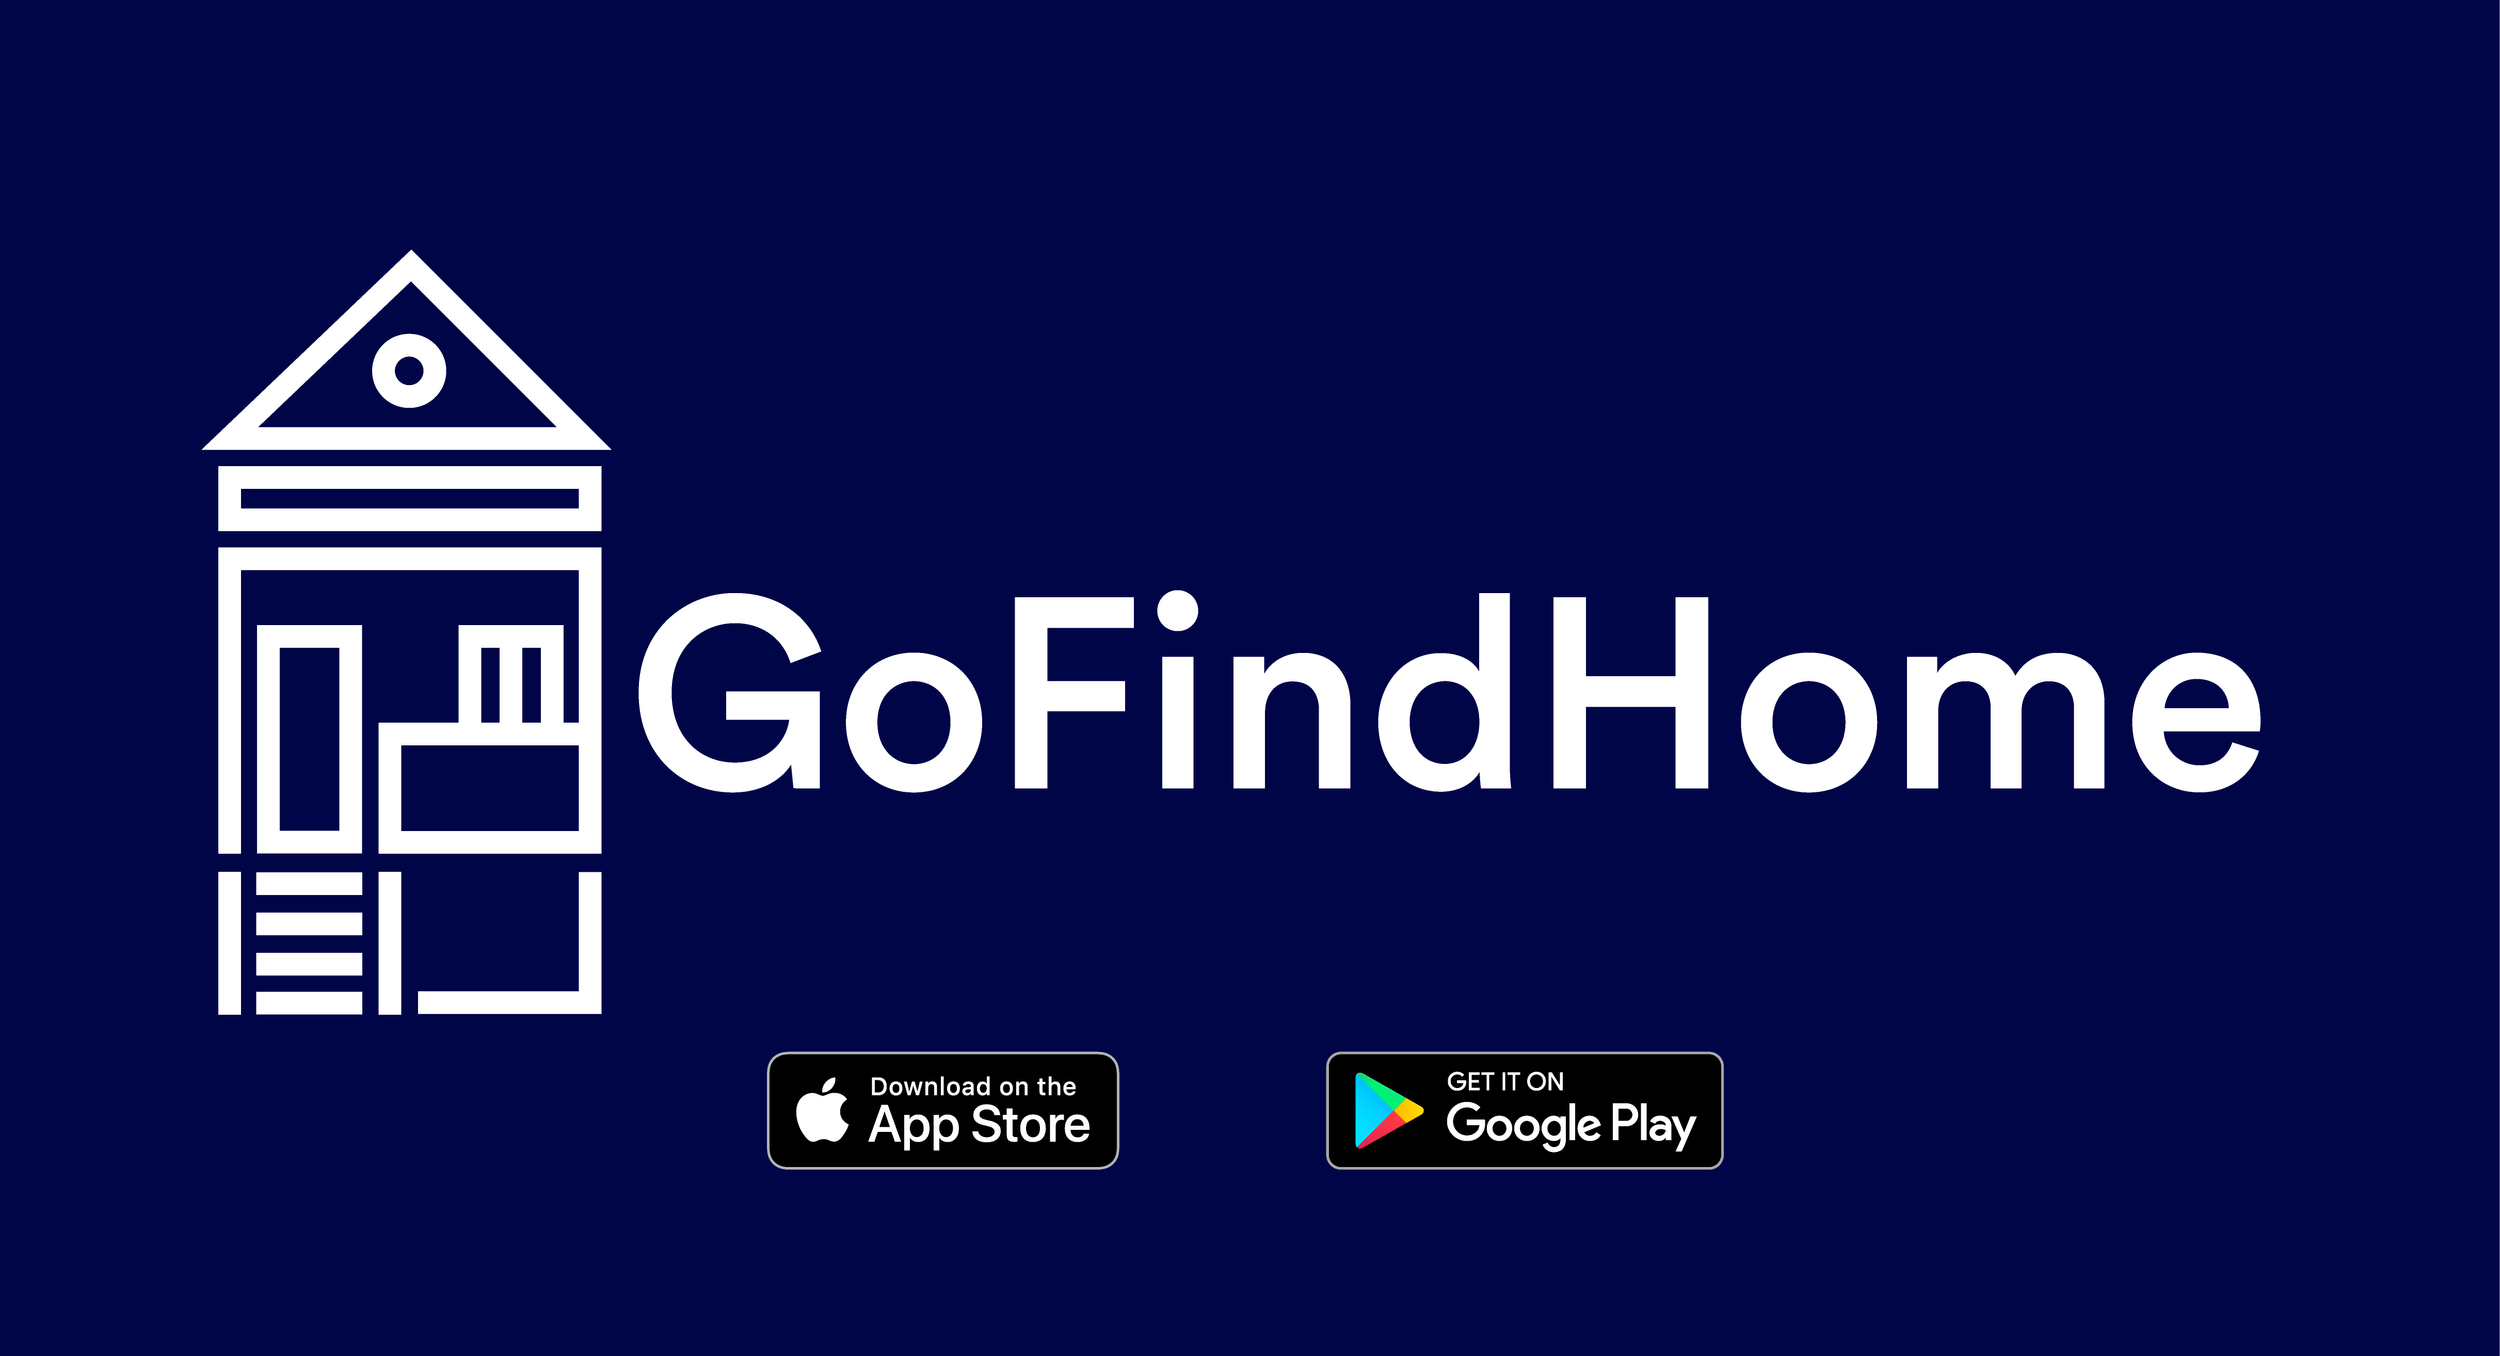 GoFindHome_centered_to_canvas_with_phone_logos.png